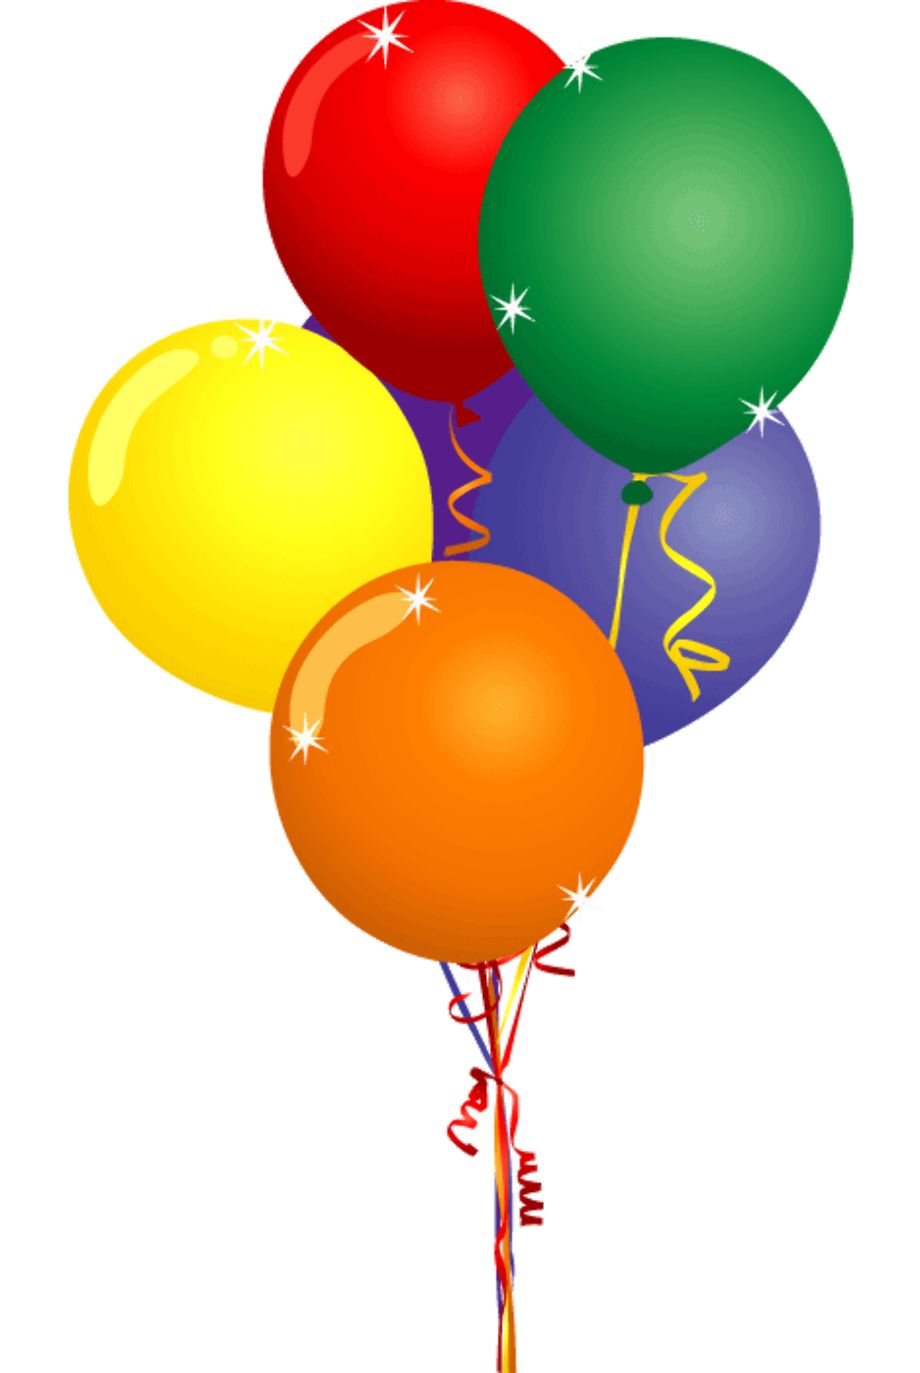 Download High Quality balloon clipart cartoon Transparent PNG Images